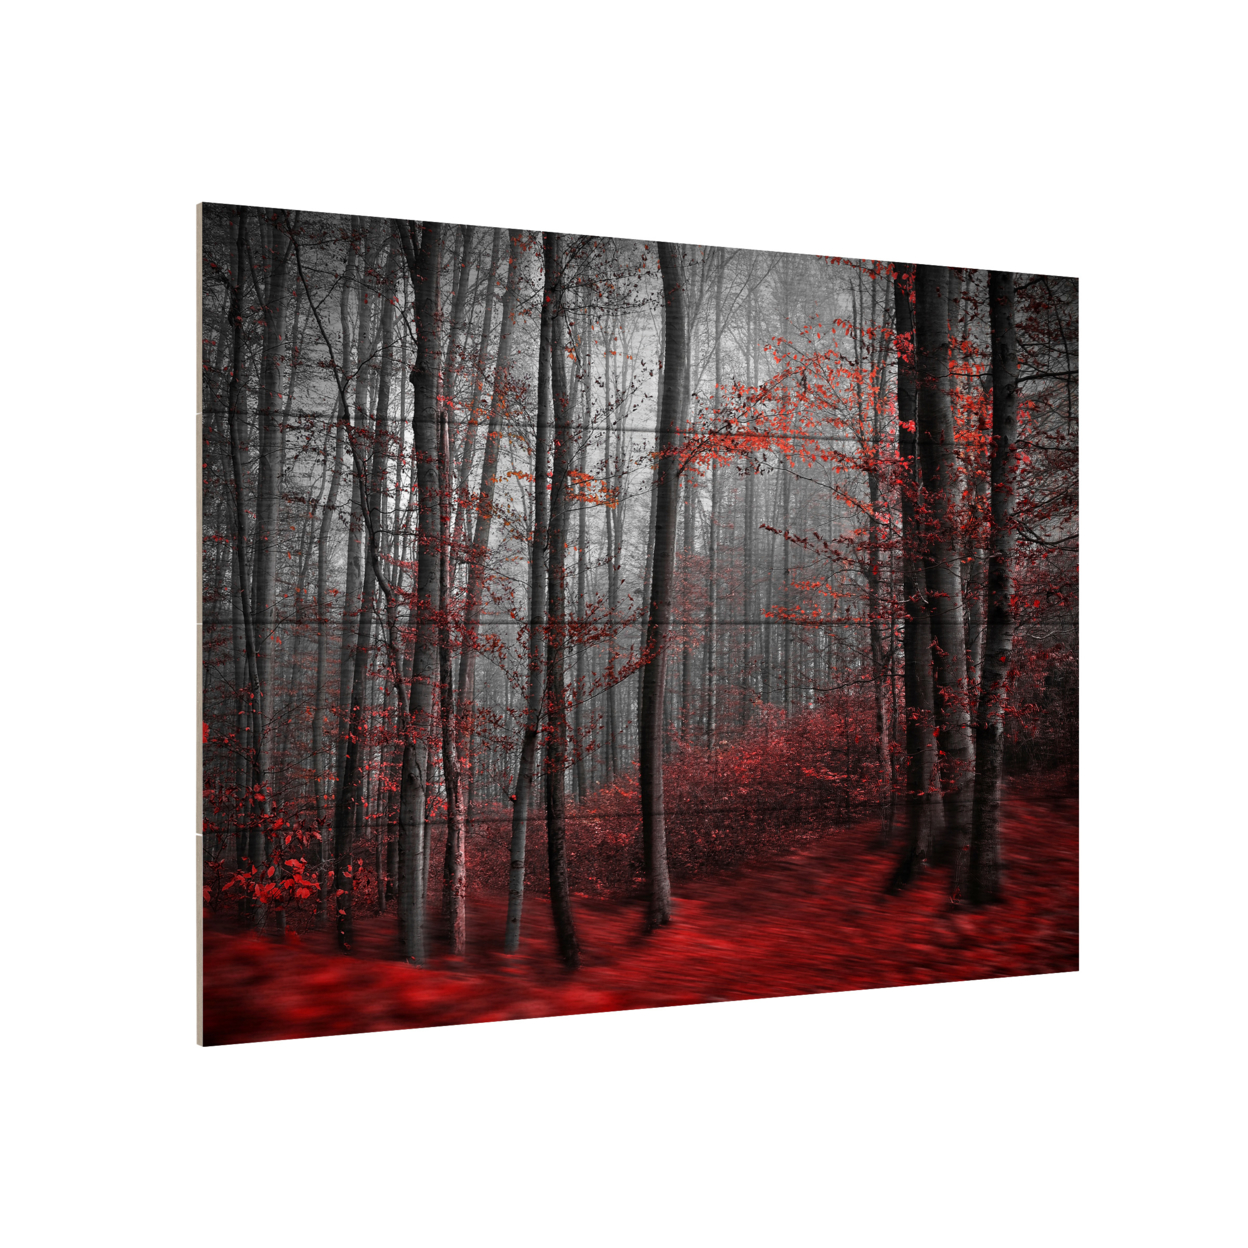 Wall Art 12 X 16 Inches Titled Bloody River Ready To Hang Printed On Wooden Planks